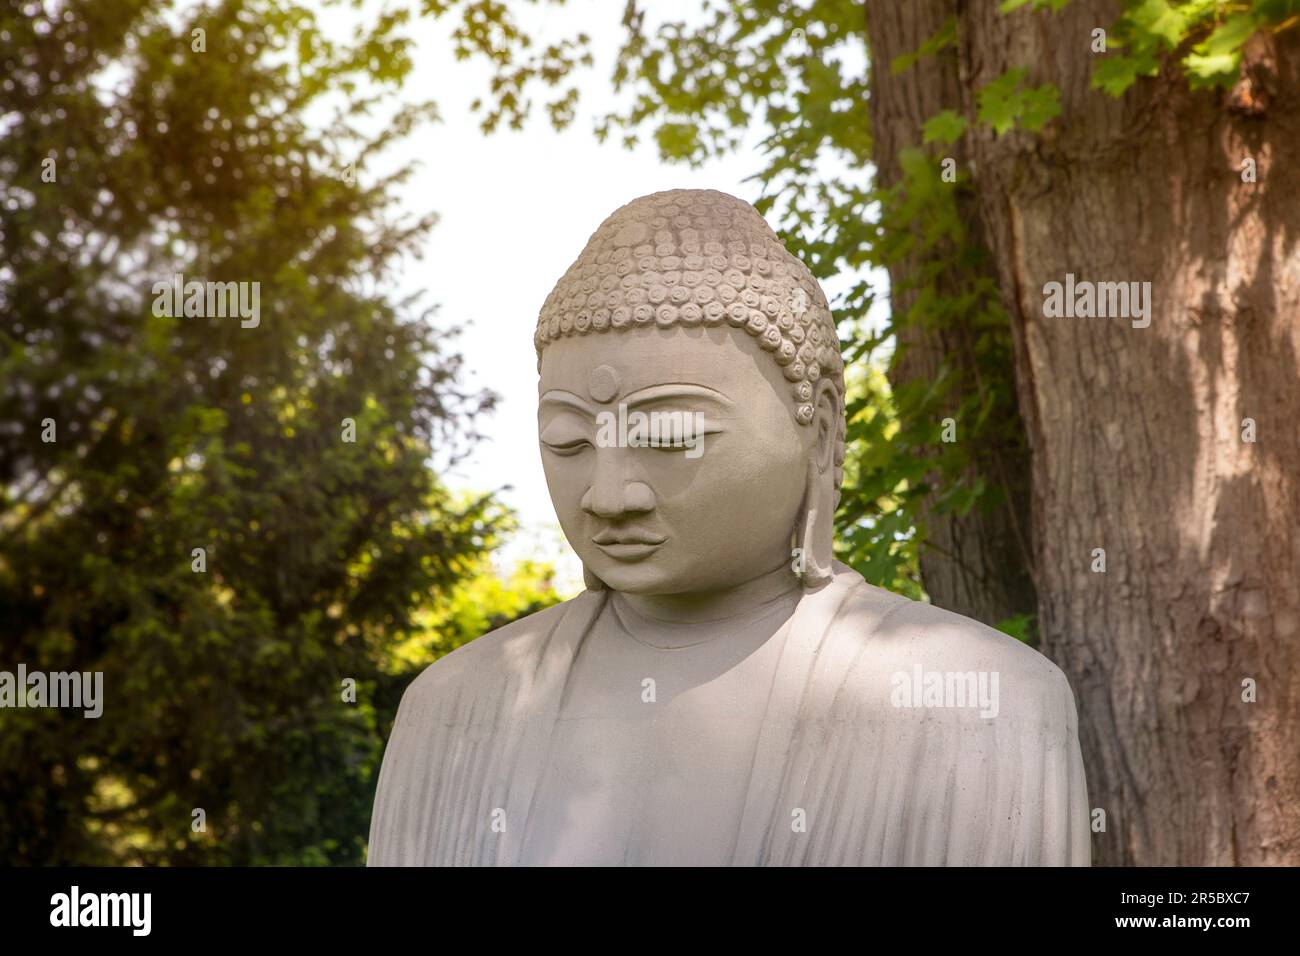 Close-up of buddha face under the tree in green garden, meditating statue outdoors. Spirituality concept. Stock Photo